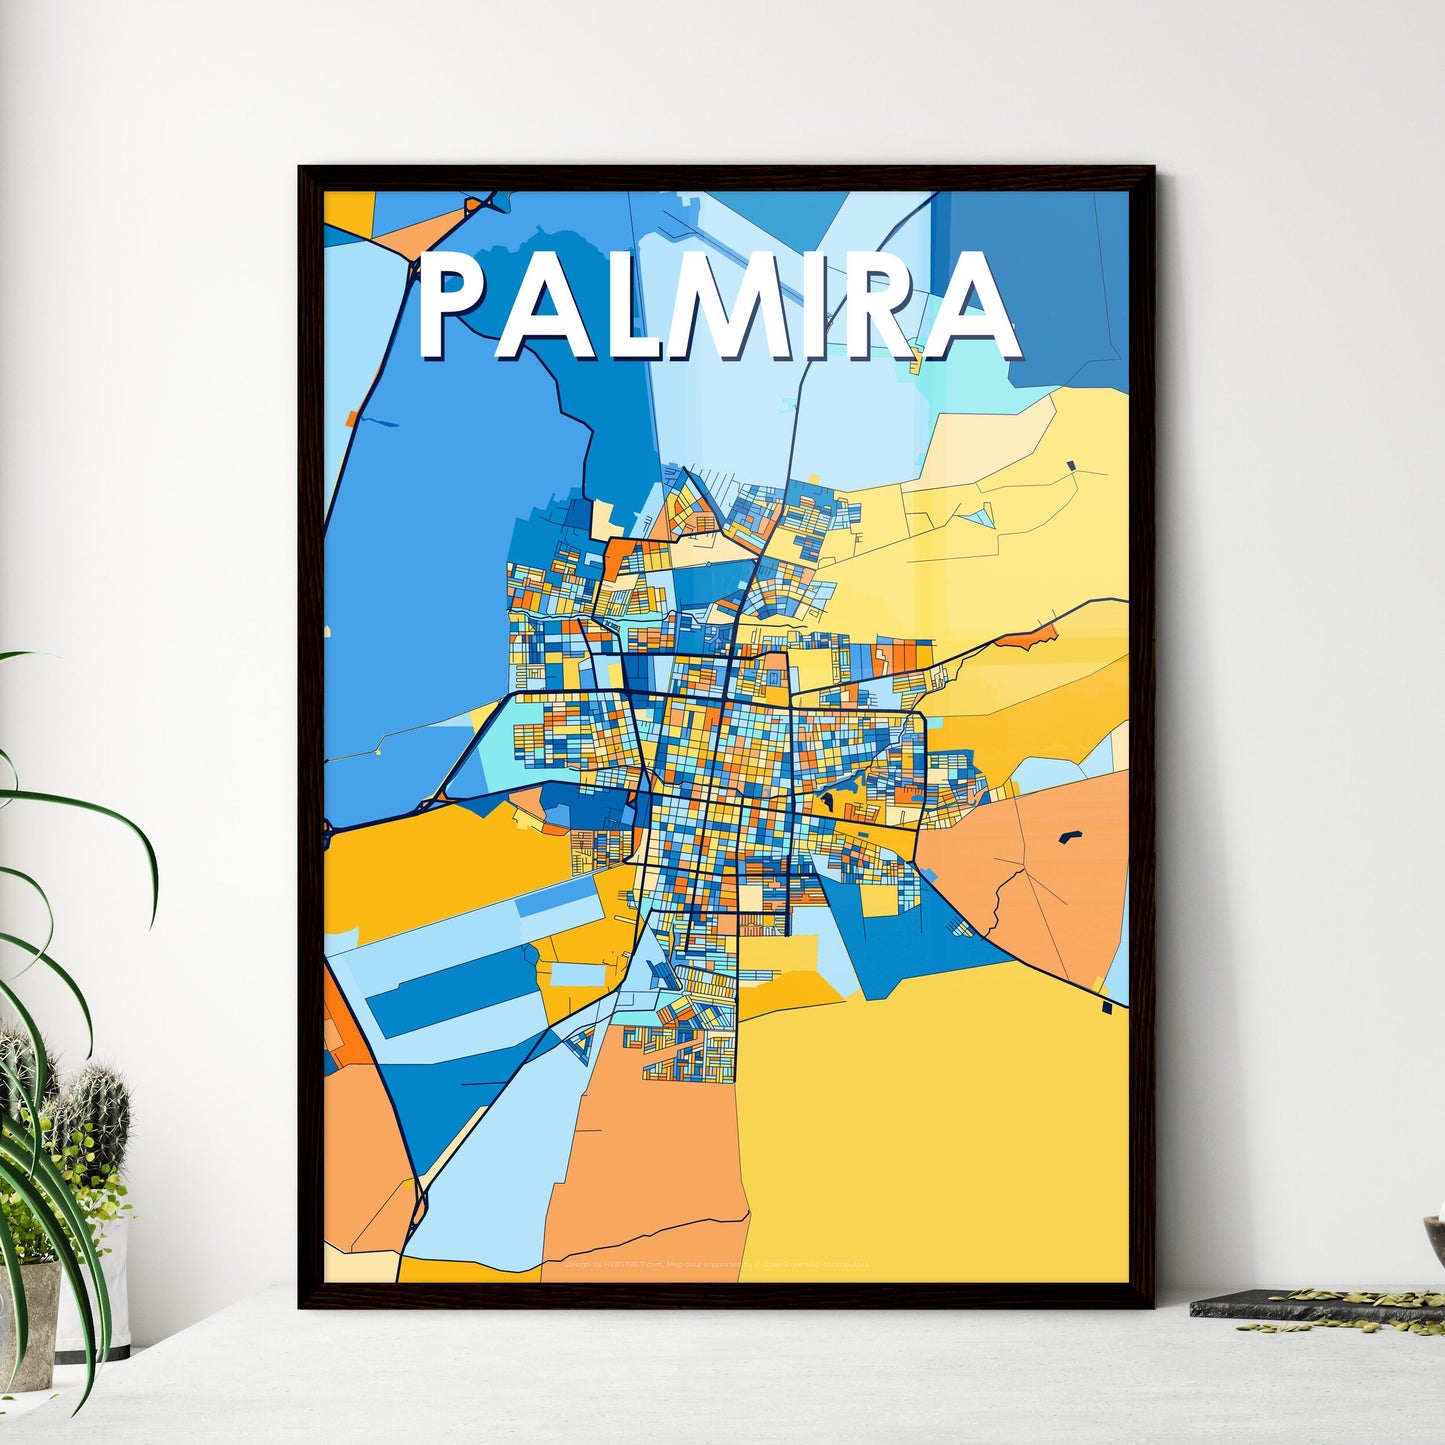 PALMIRA COLOMBIA Vibrant Colorful Art Map Poster Blue Orange